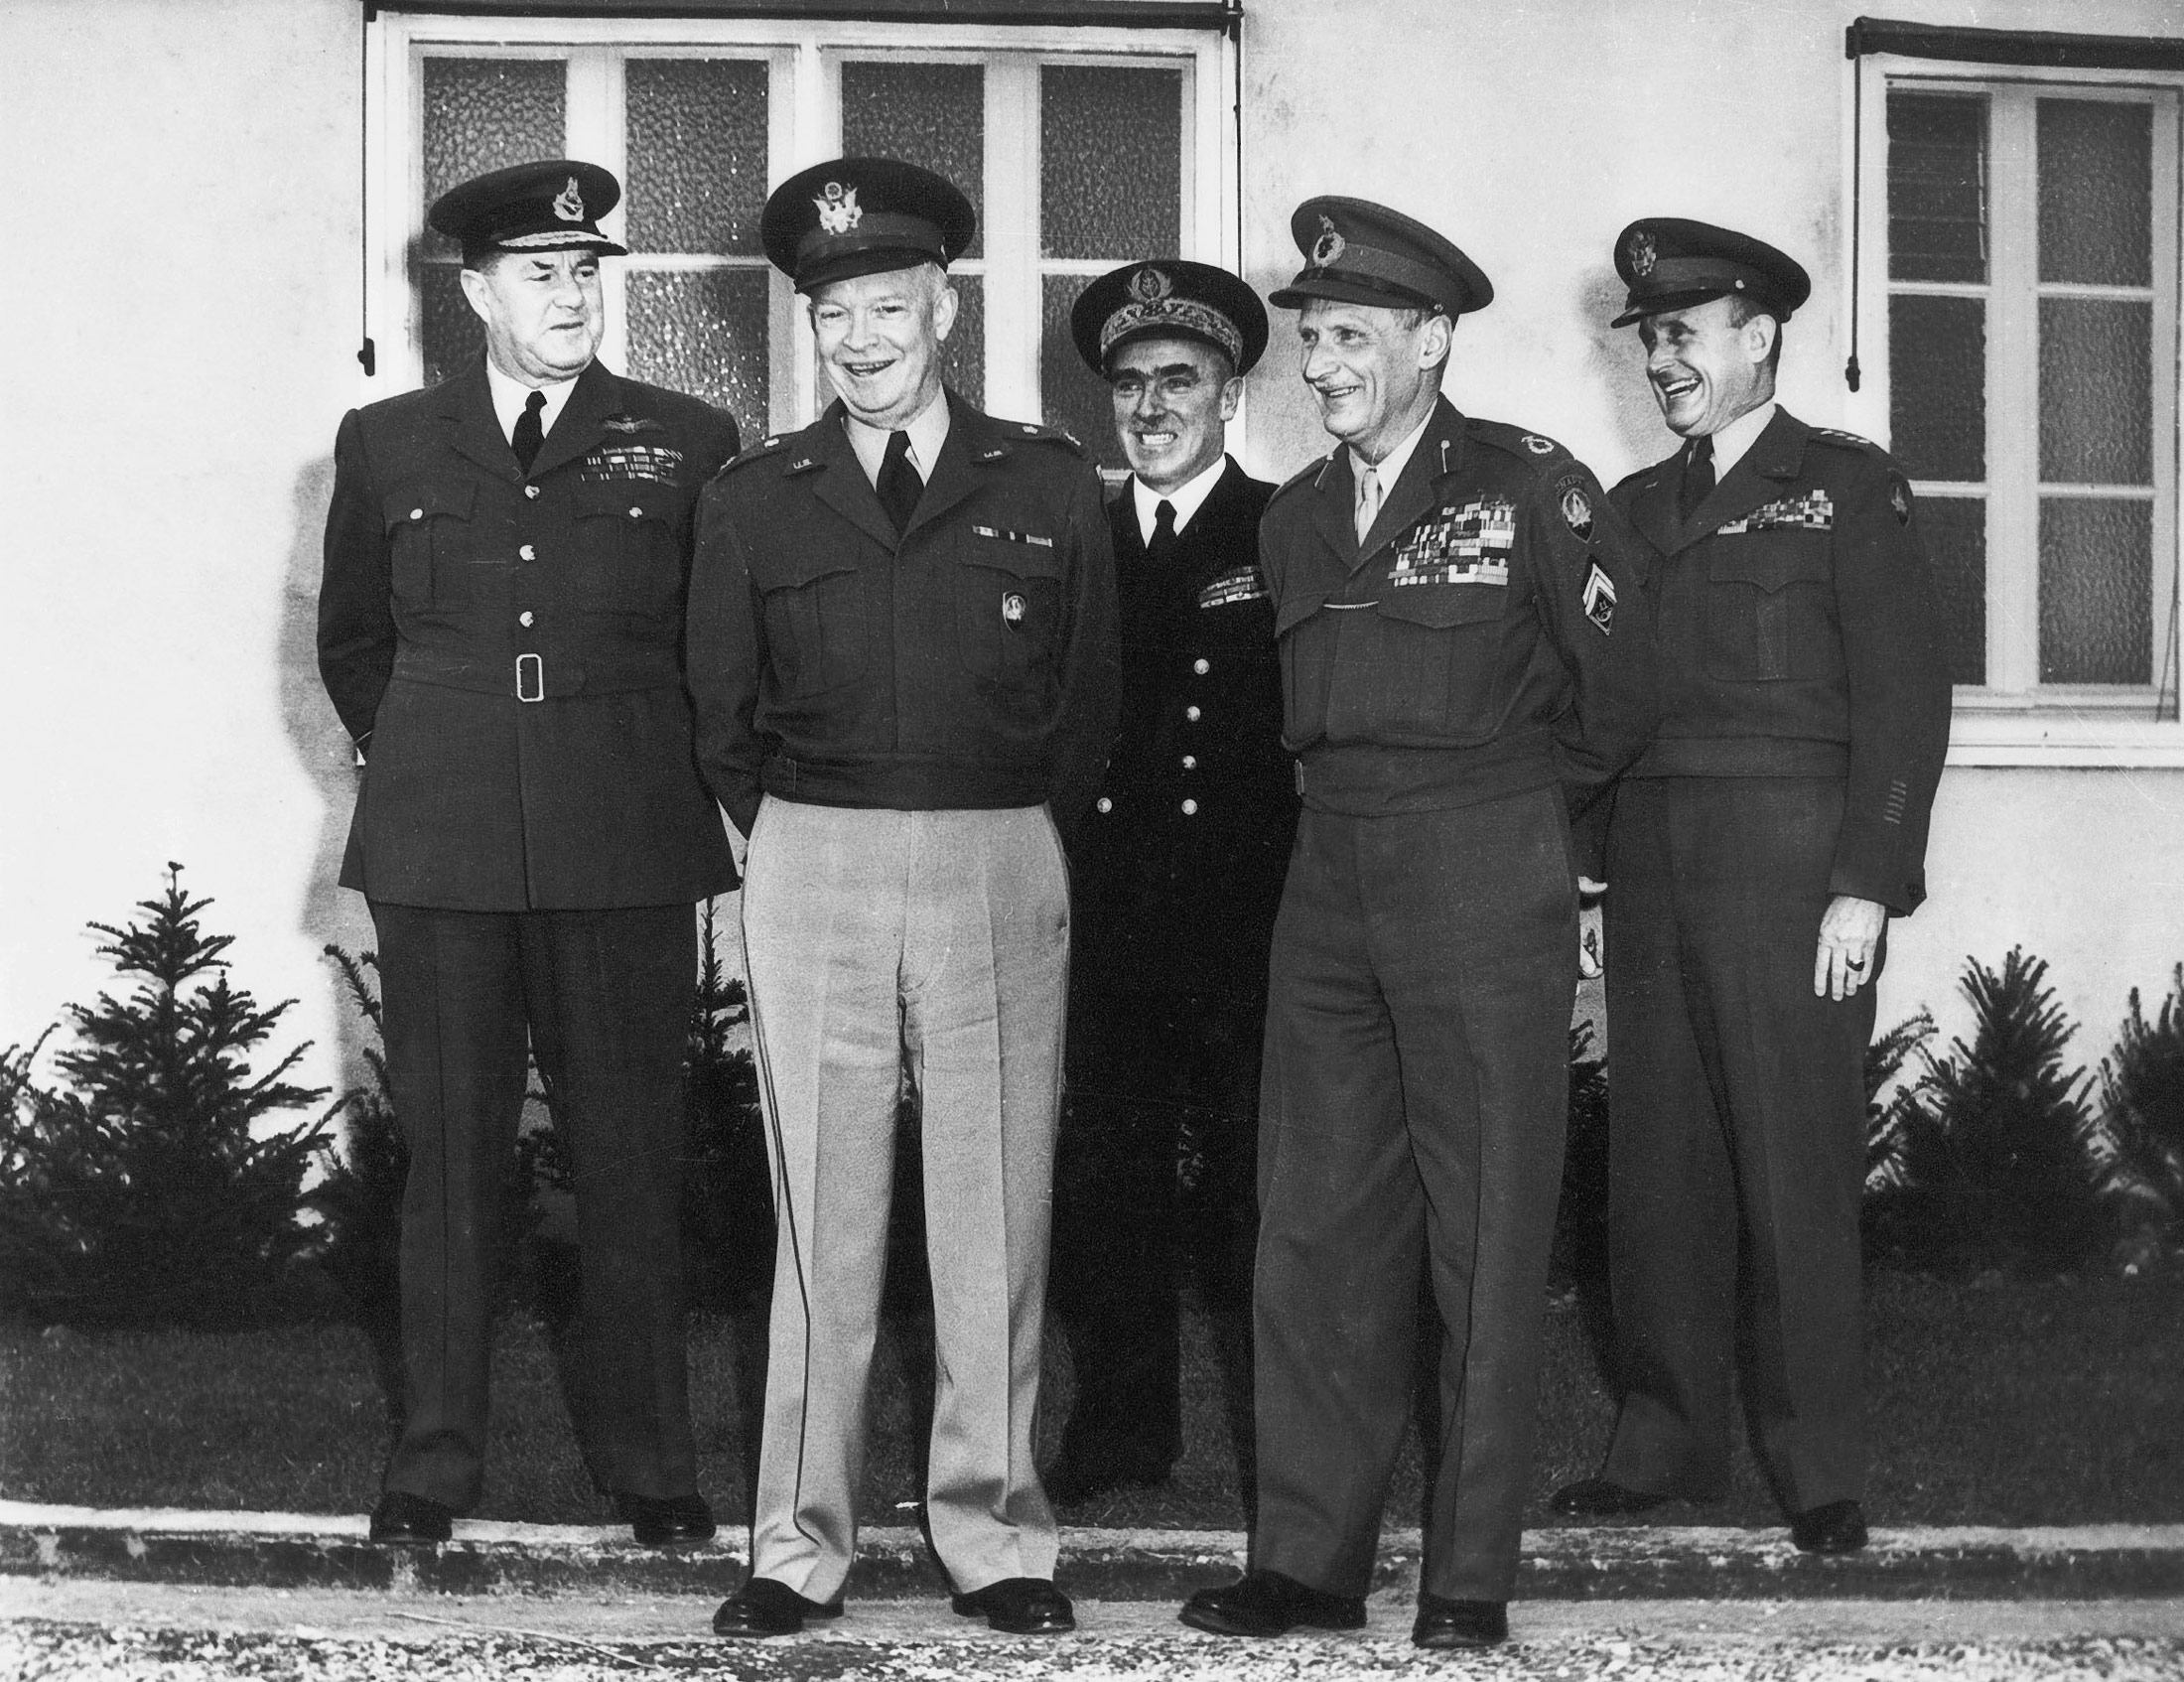 Gruenther (far right) with General Eisenhower